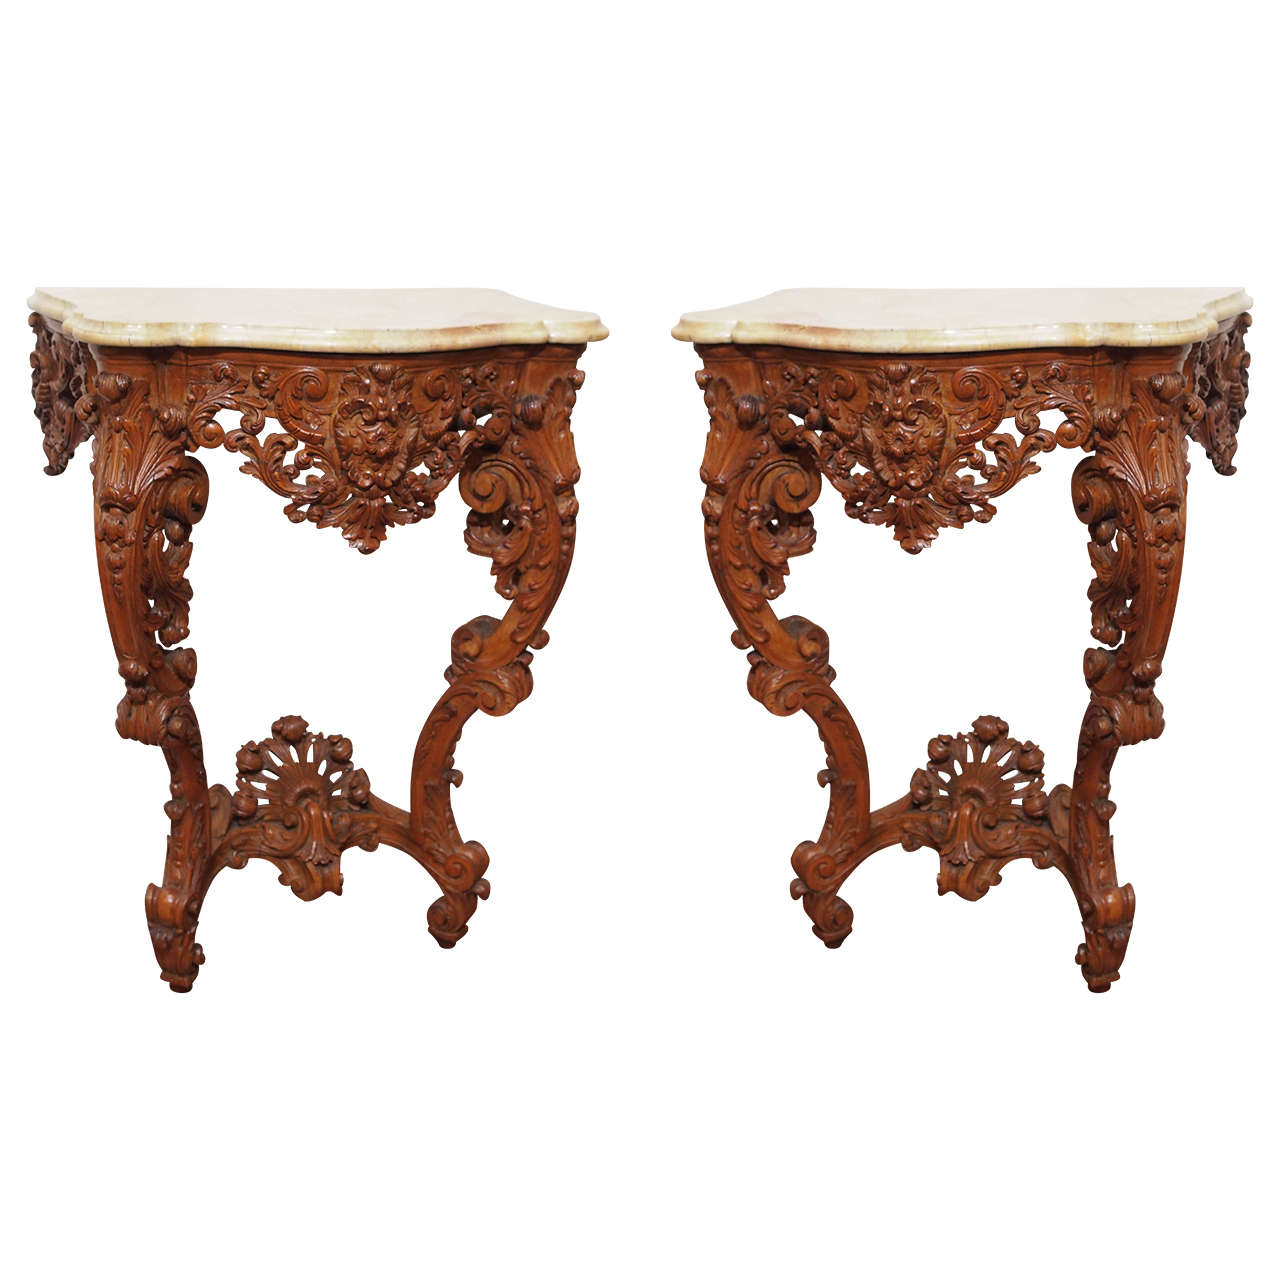 Pair of Louis XV Wall-Mounted Console Tables with Marble Top